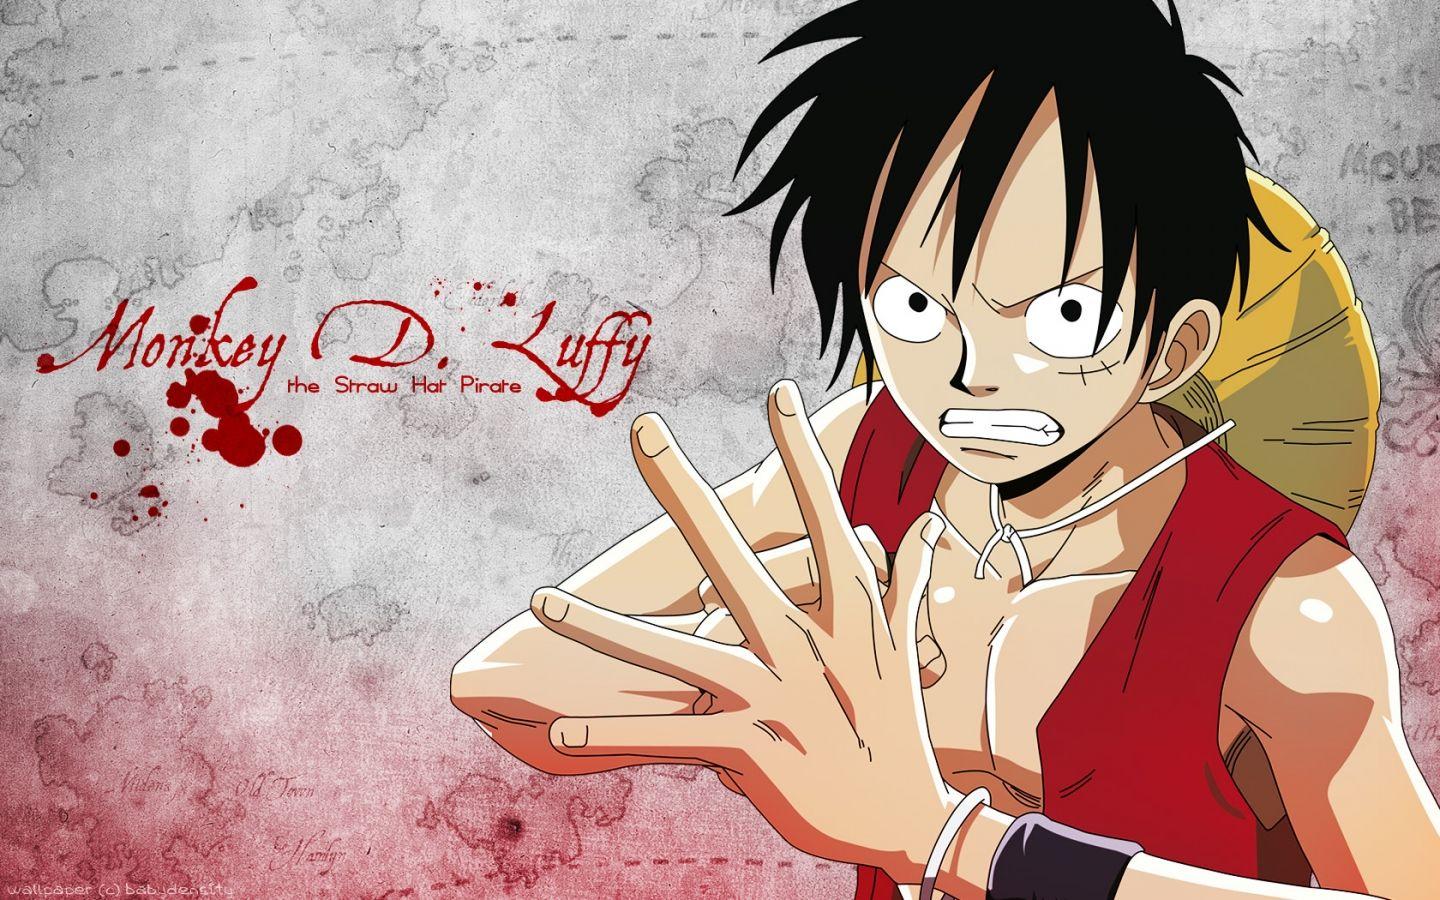 Luffy Serious Wallpaper : Luffy (armament ) by deannugent95 on DeviantArt : Luffy wallpapers 4k hd for desktop, iphone, pc, laptop, computer, android phone, smartphone, imac, macbook wallpapers in ultra hd 4k 3840x2160, 1920x1080 high definition resolutions.